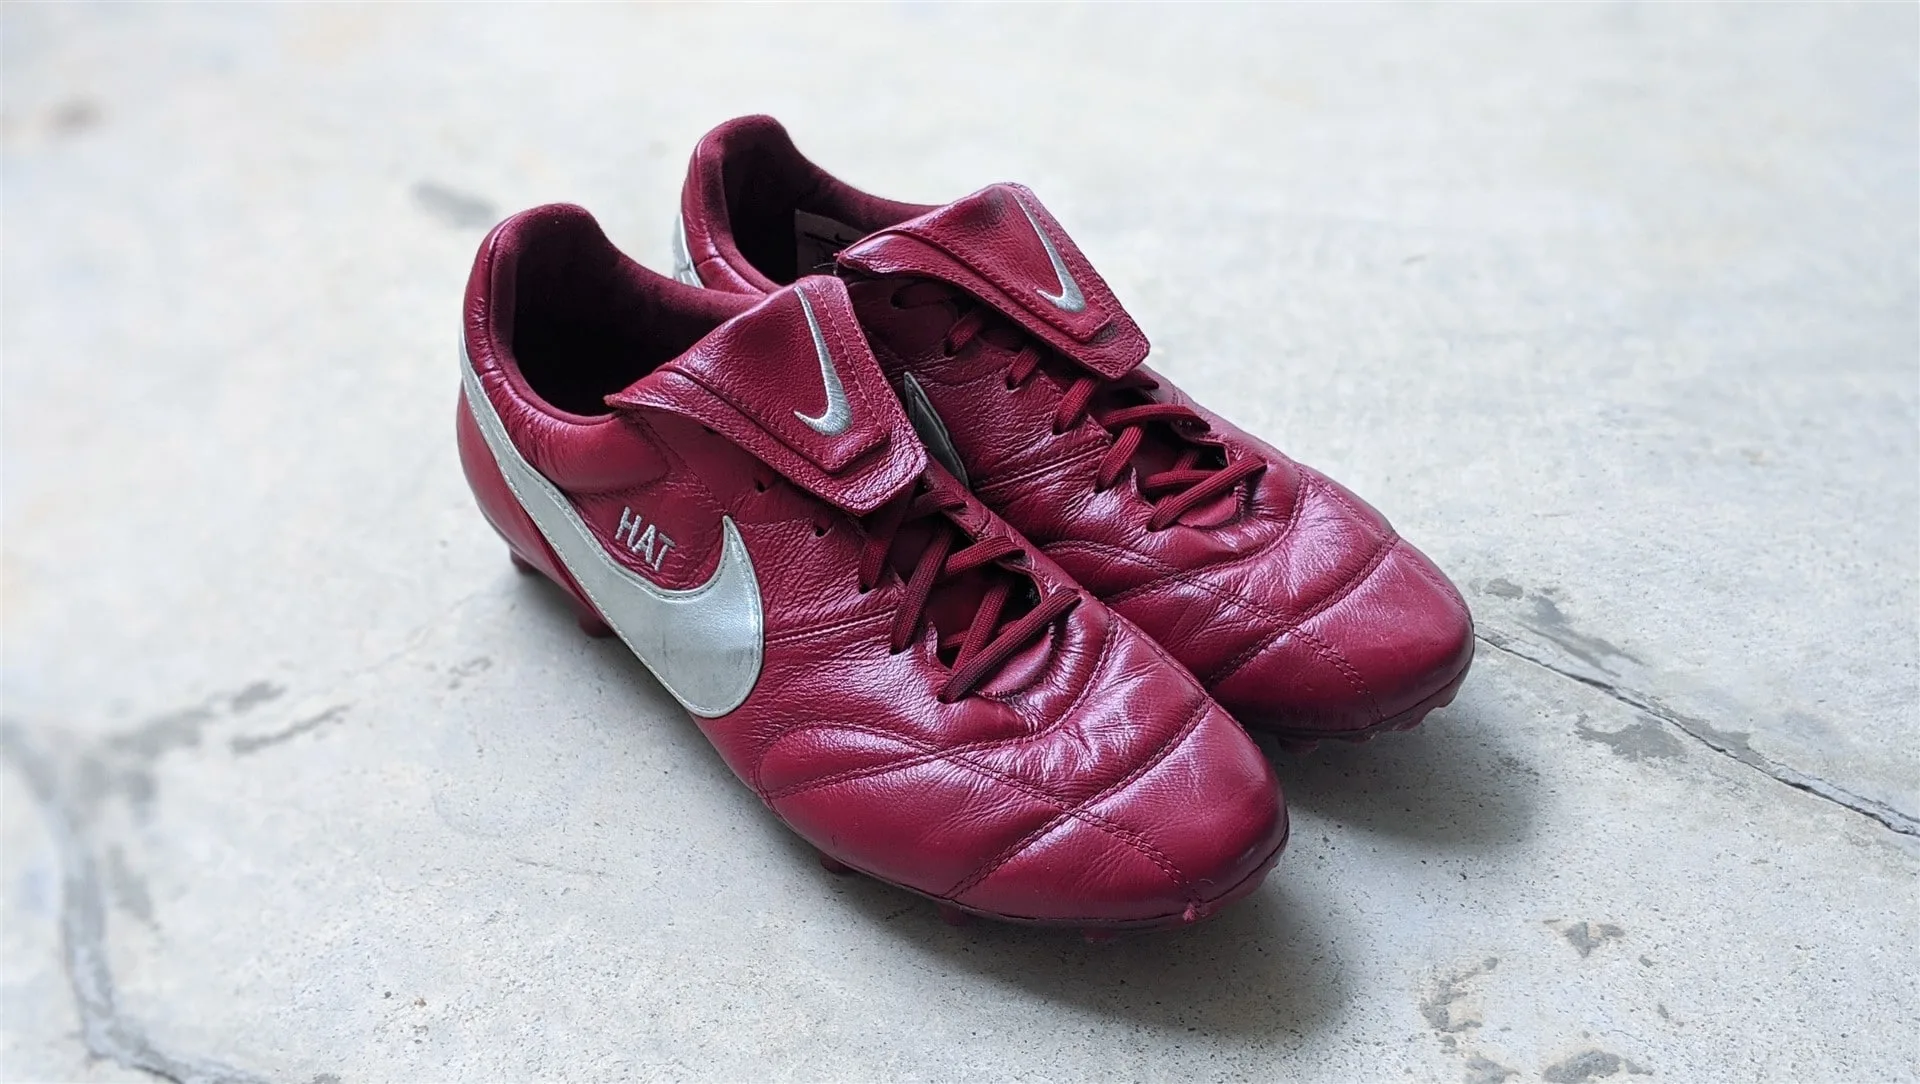 Nike Premier 2.0 football boots soccer cleats review